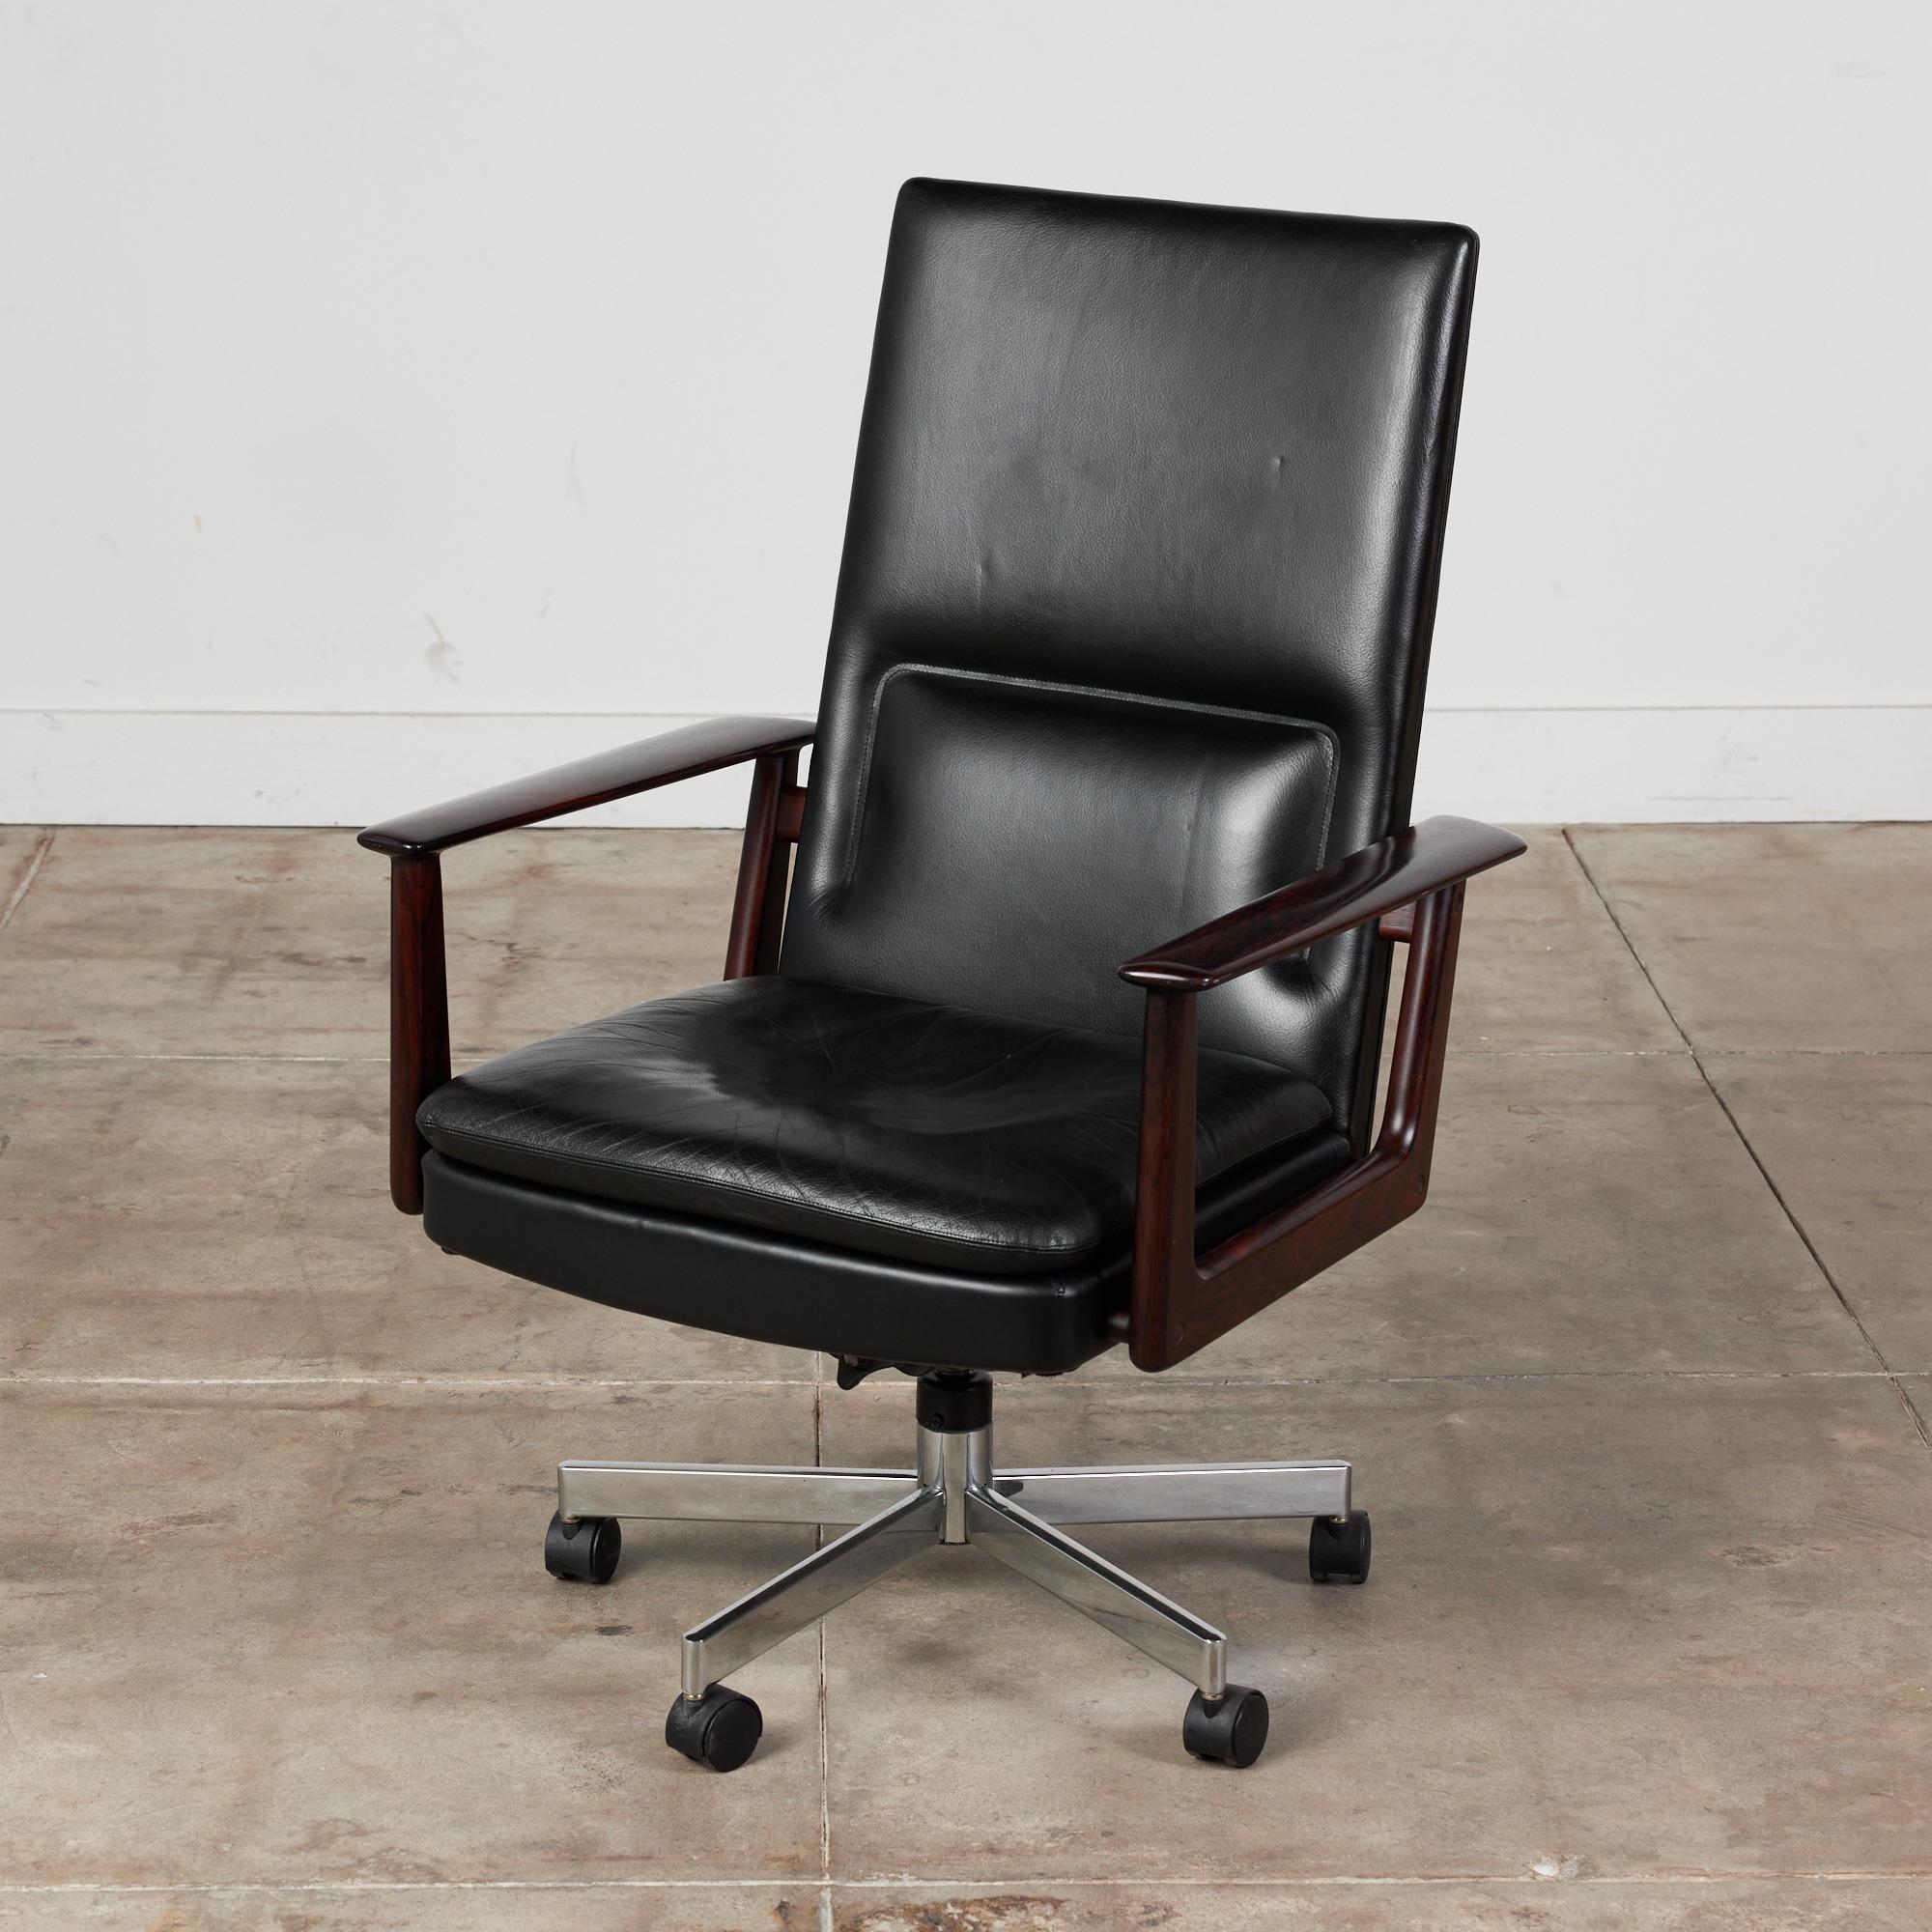 Desk chair by Arne Vodder for Sibast, c.1960s, Denmark. The armchair features black leather upholstered seat and tall seatback. The armrests are a beautiful dark rosewood The chair height is adjustable and sits on a chrome metal base with five